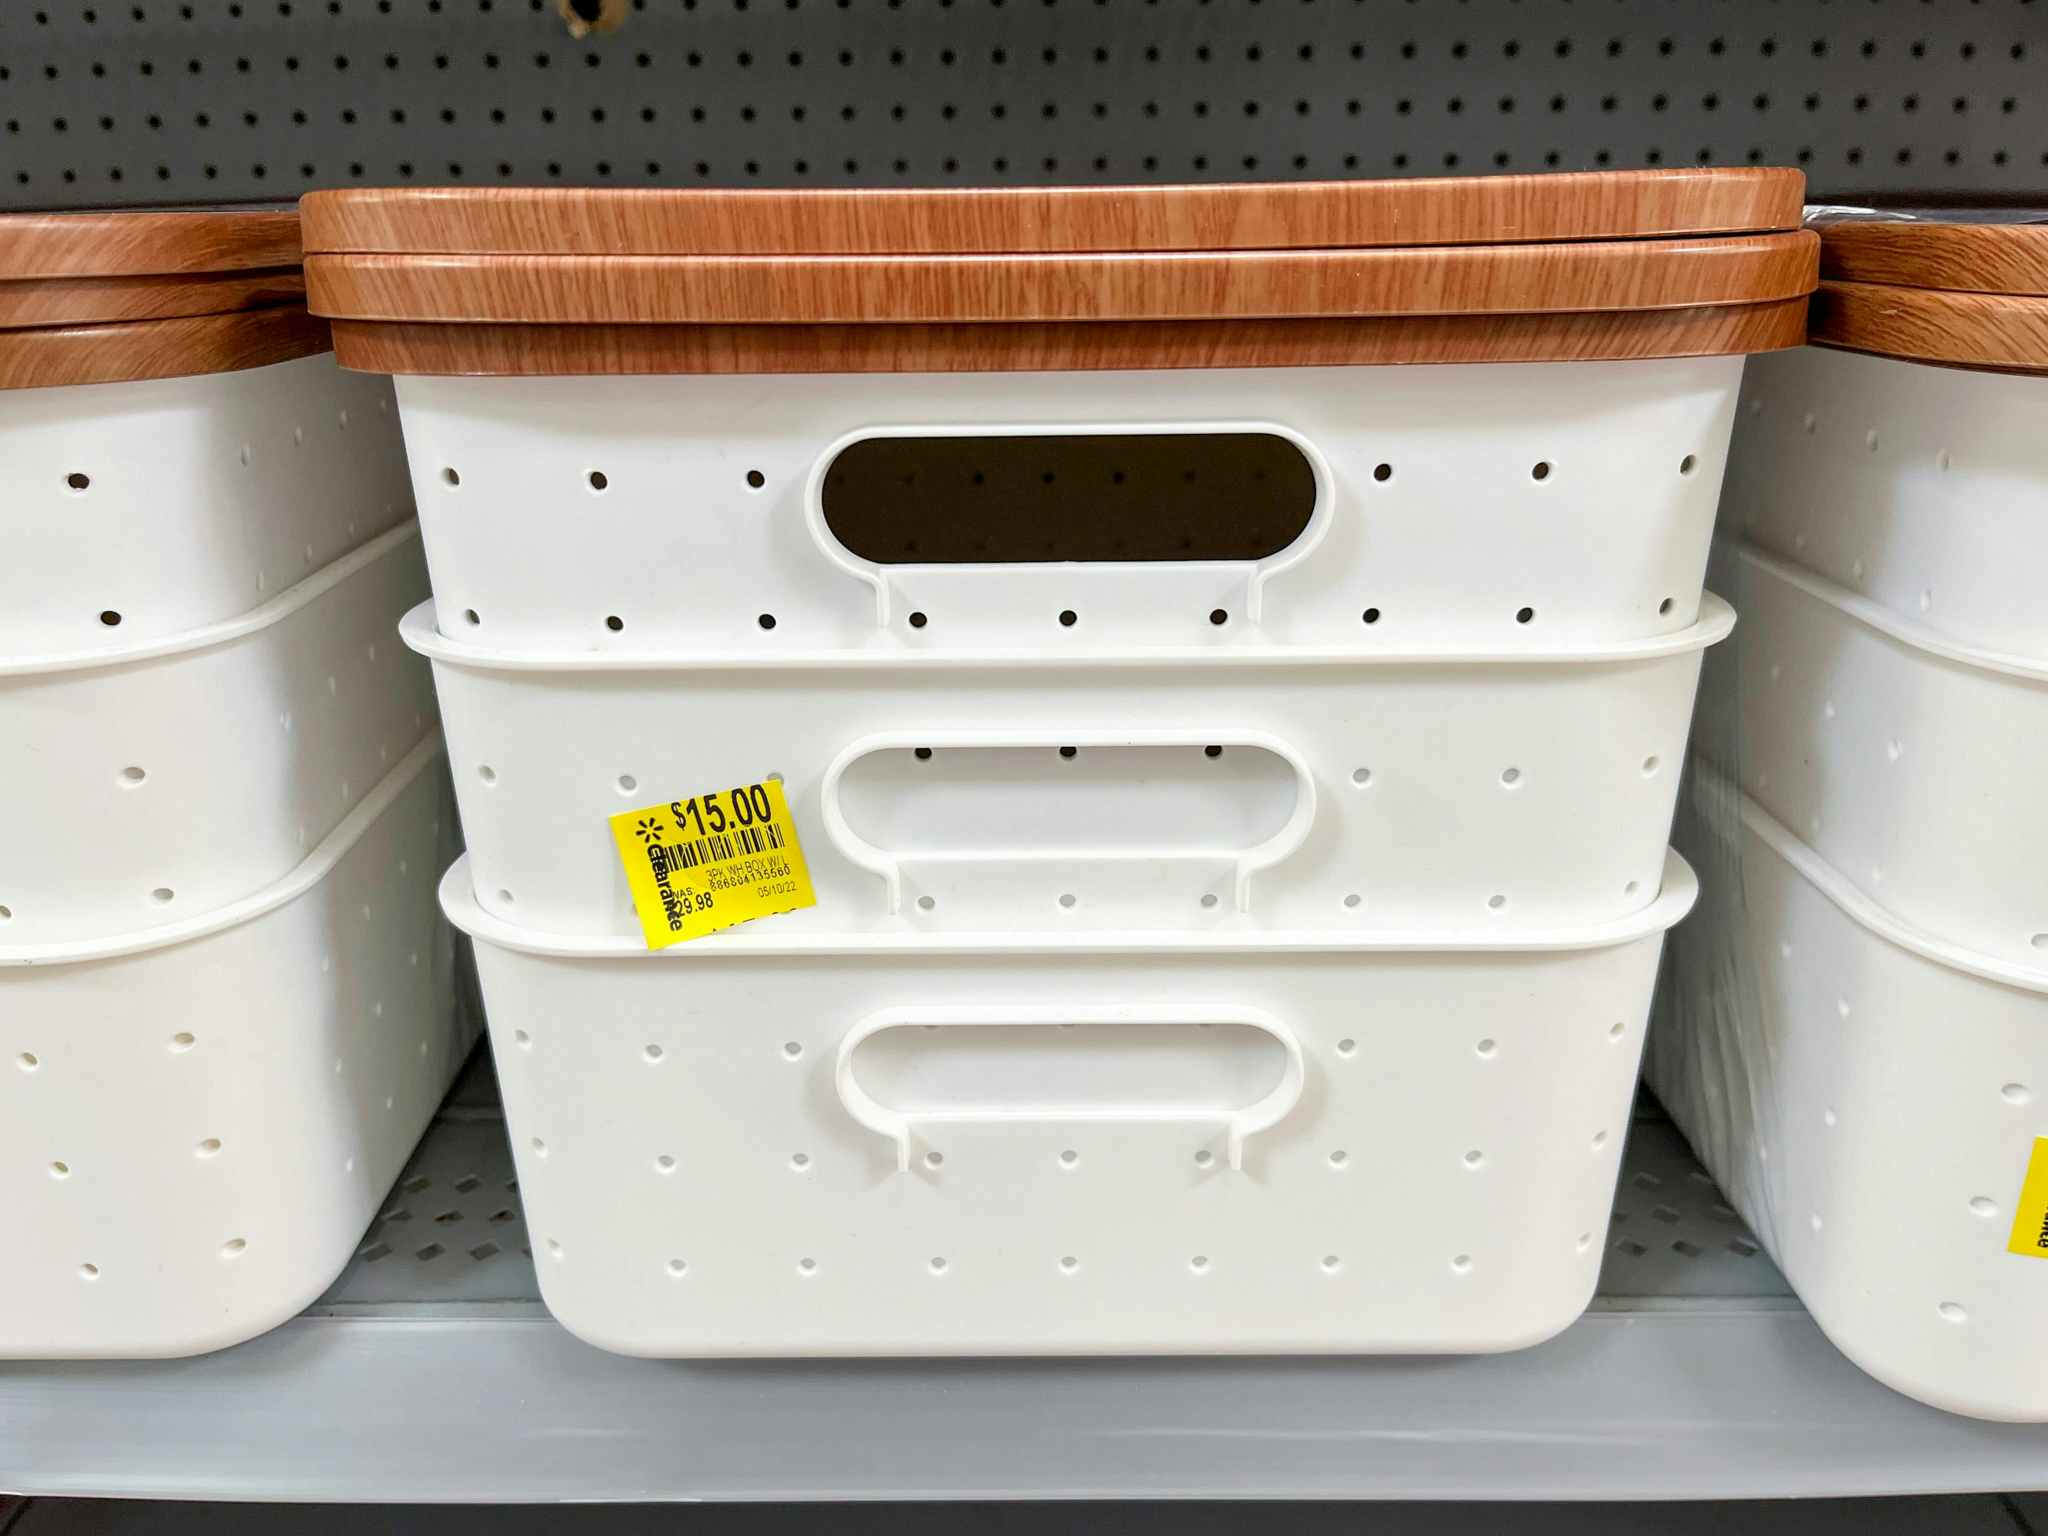 walmart pen + gear storage boxes with lids on clearance on shelf